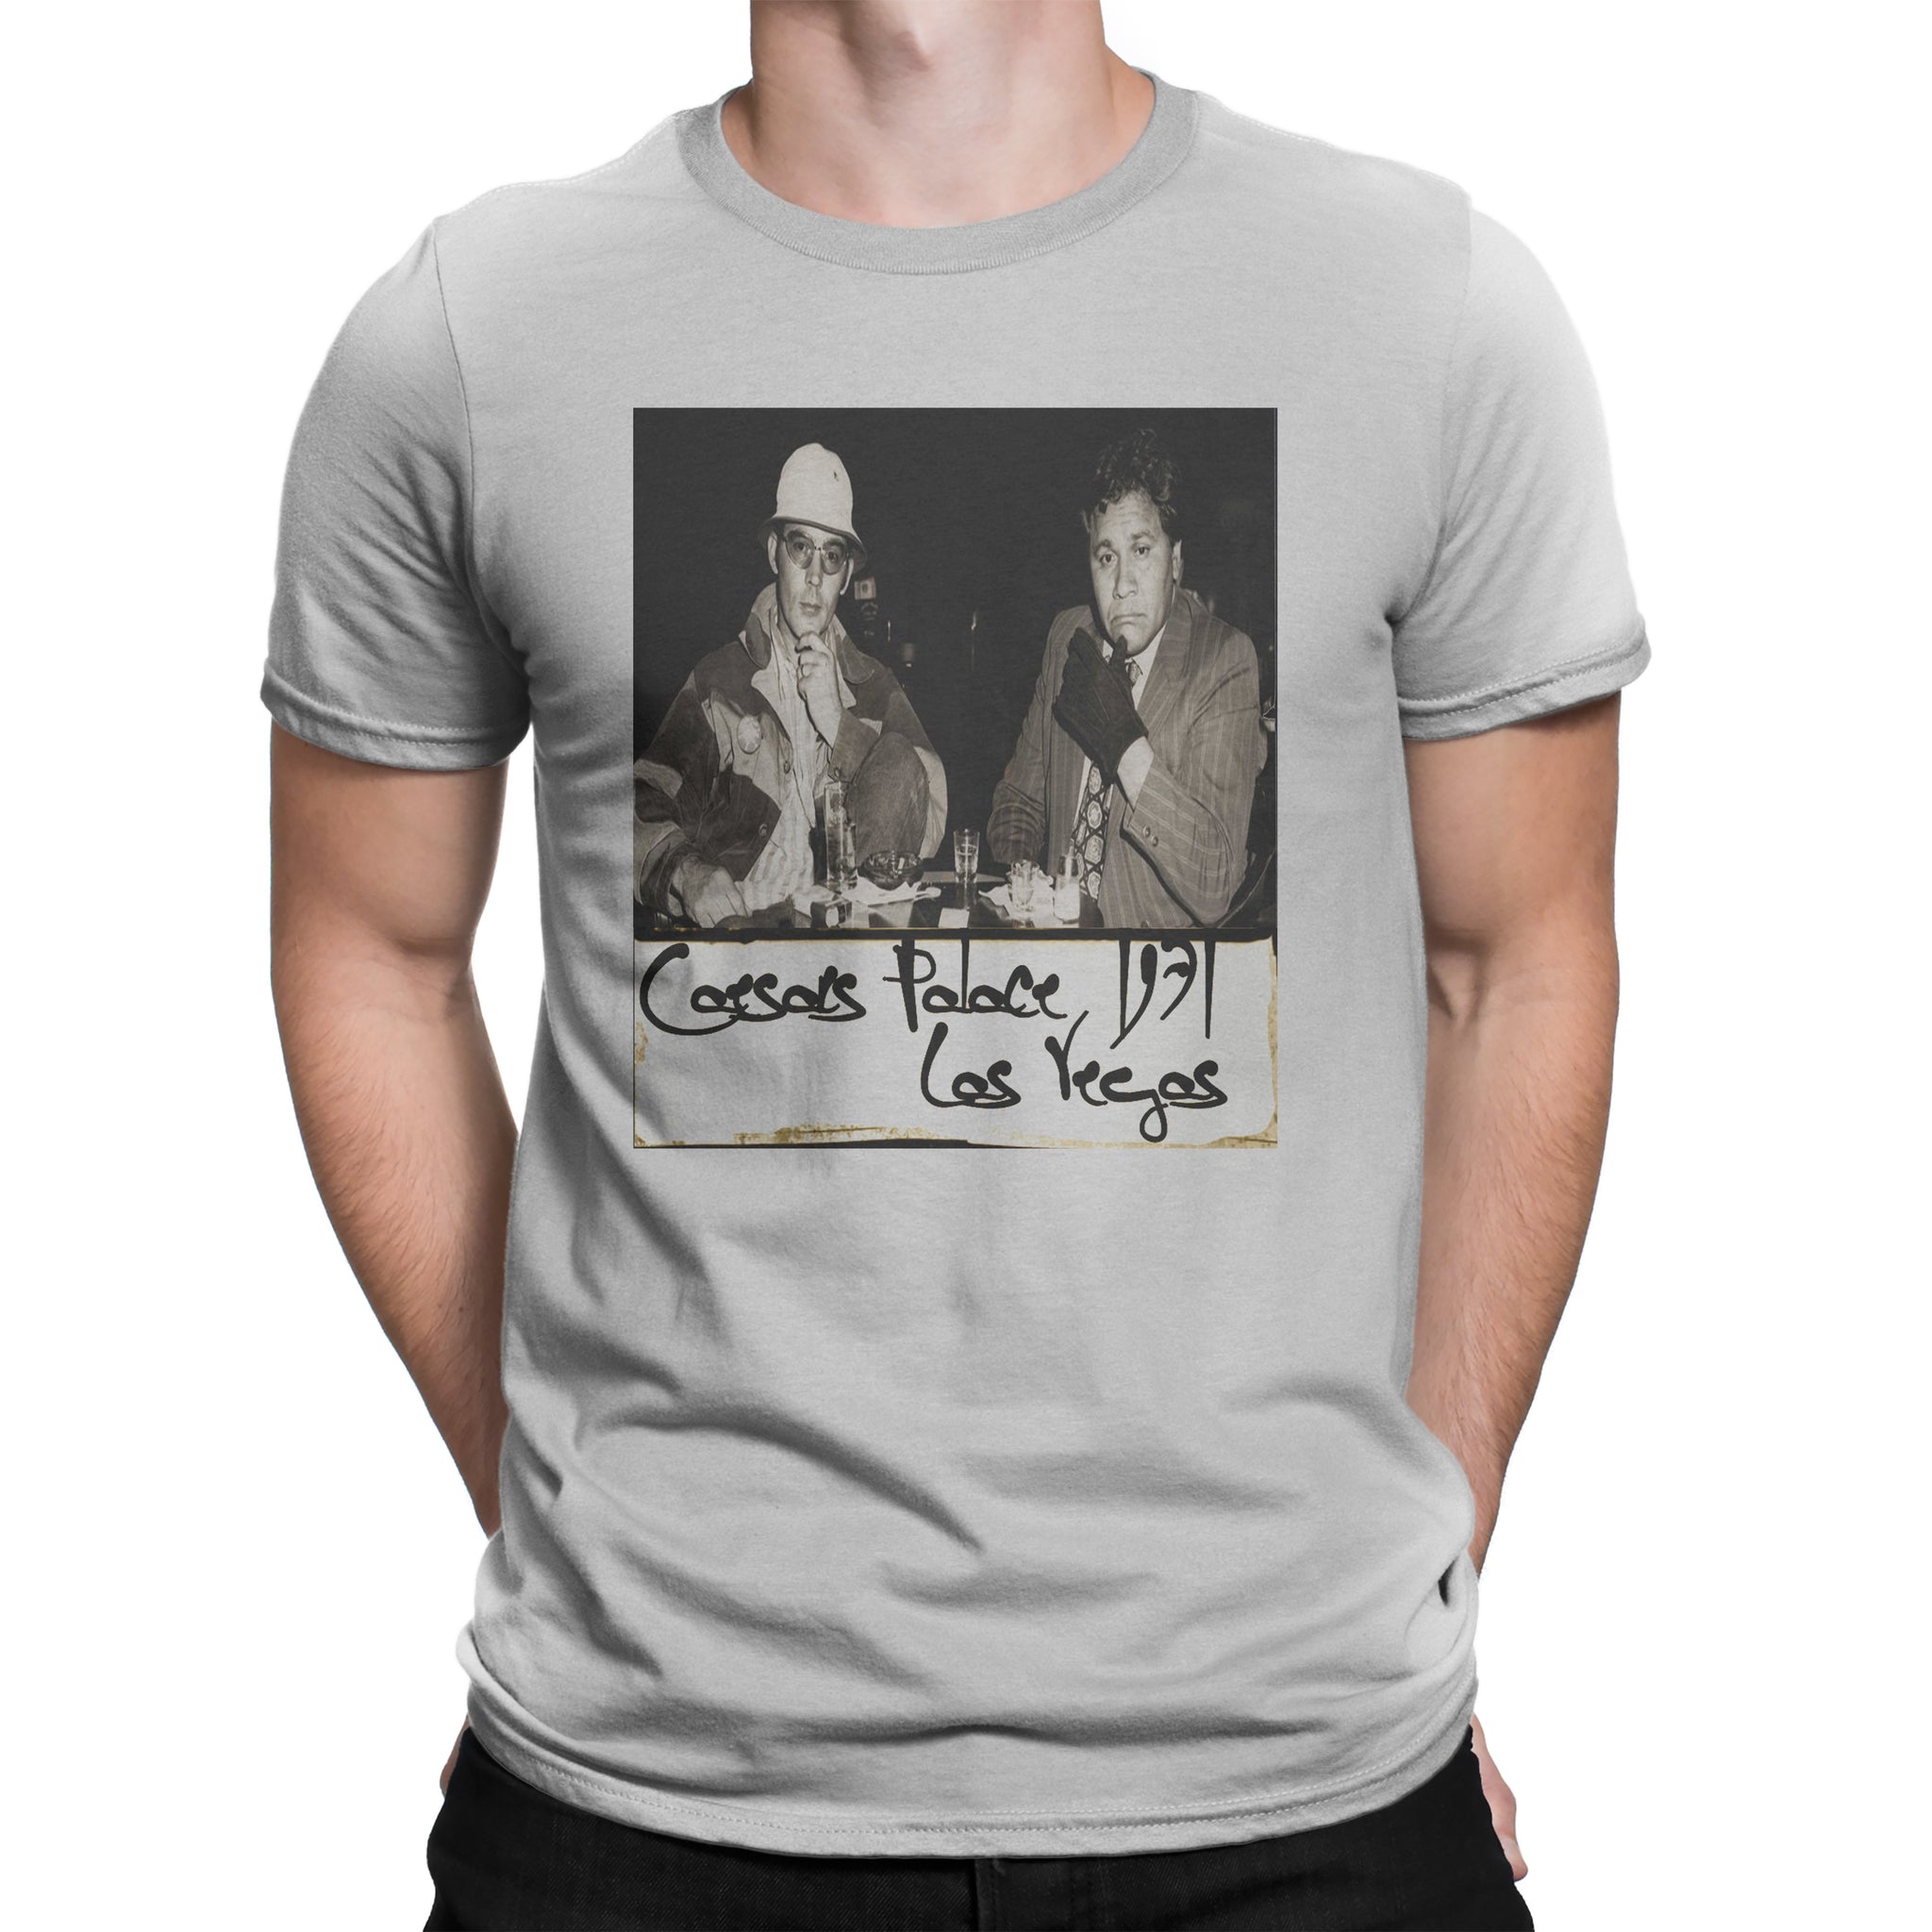 Fear and Loathing "polaroid" shirt